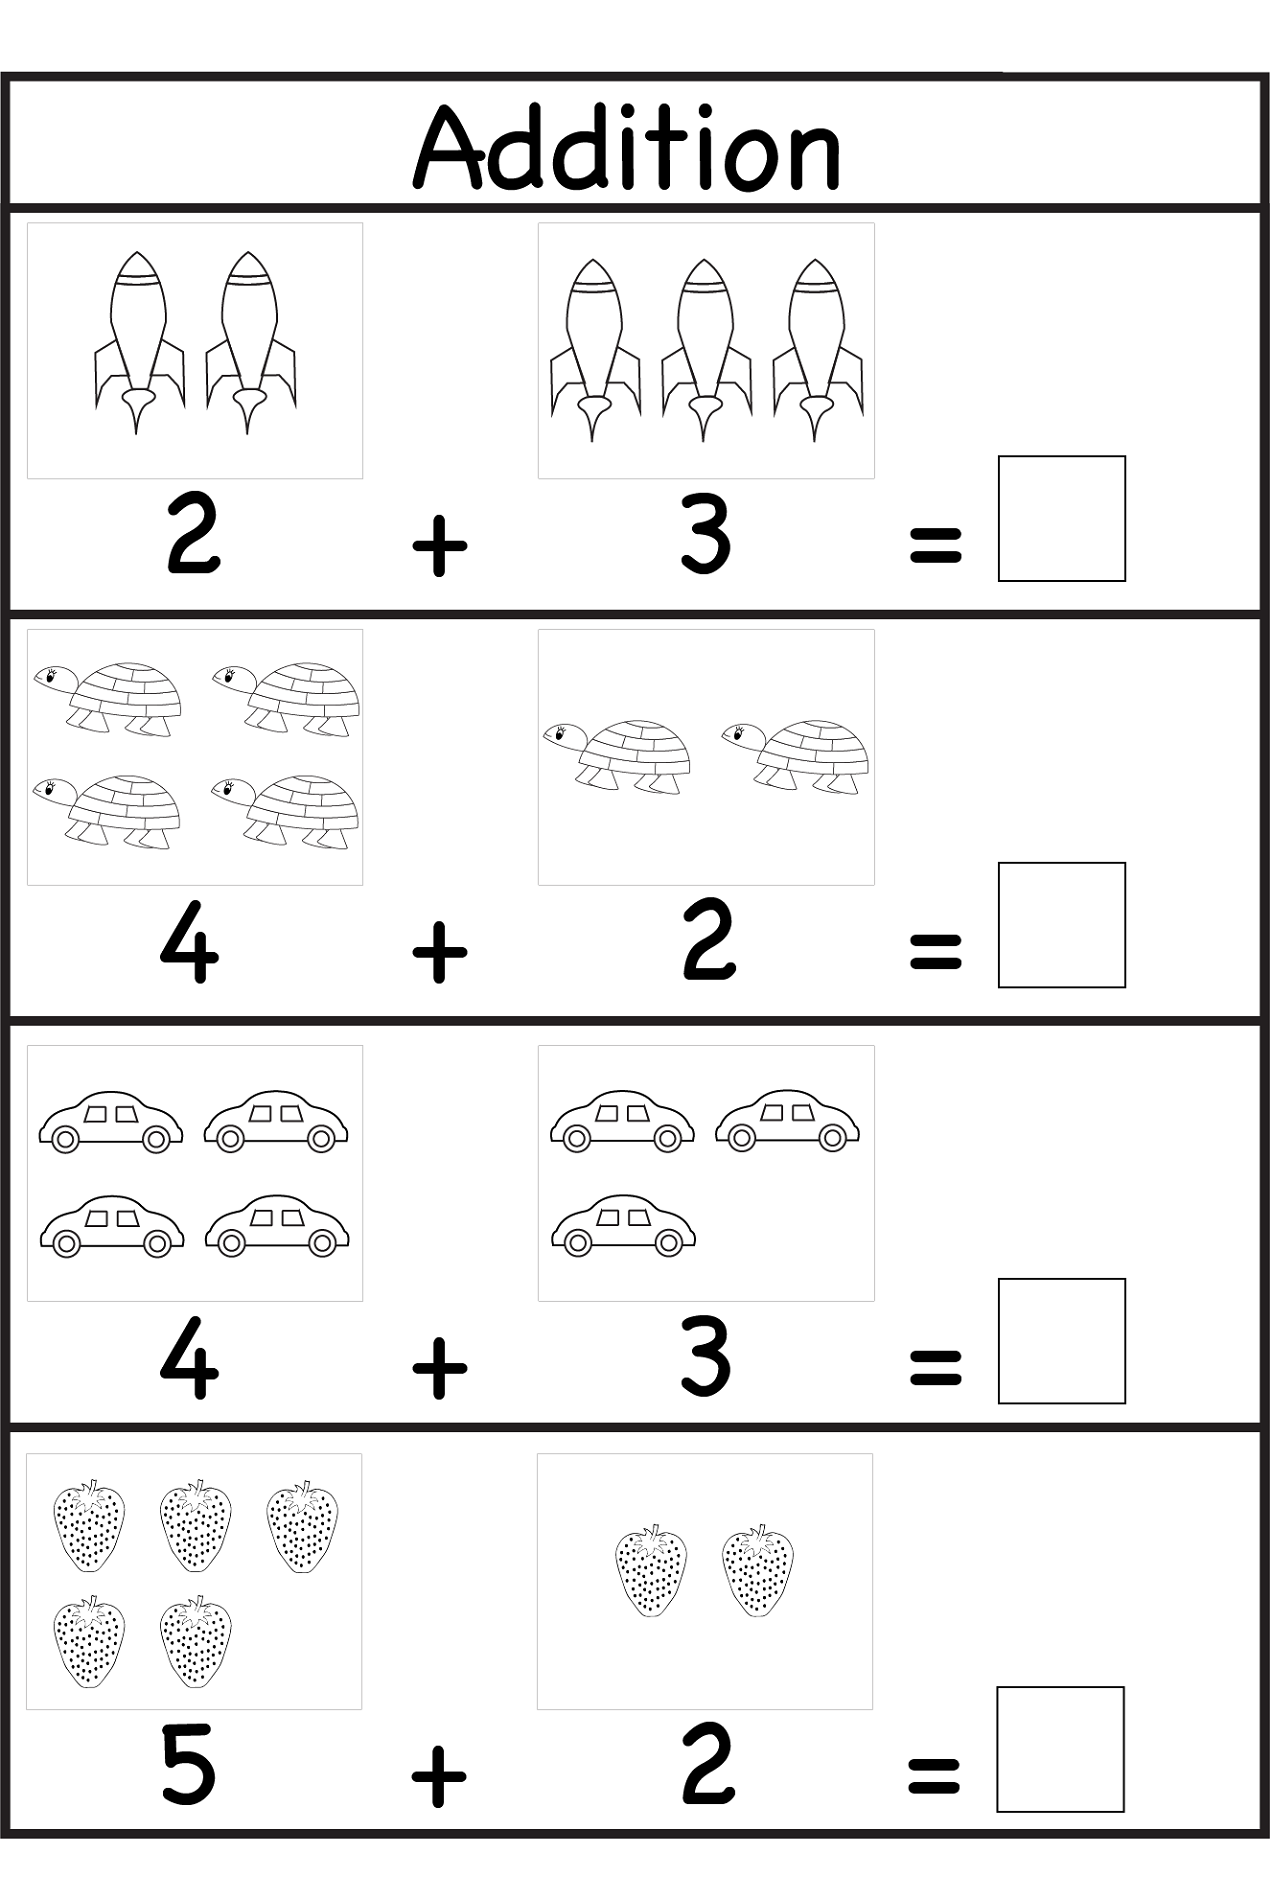 Worksheets for Three Years Old | Activity Shelter